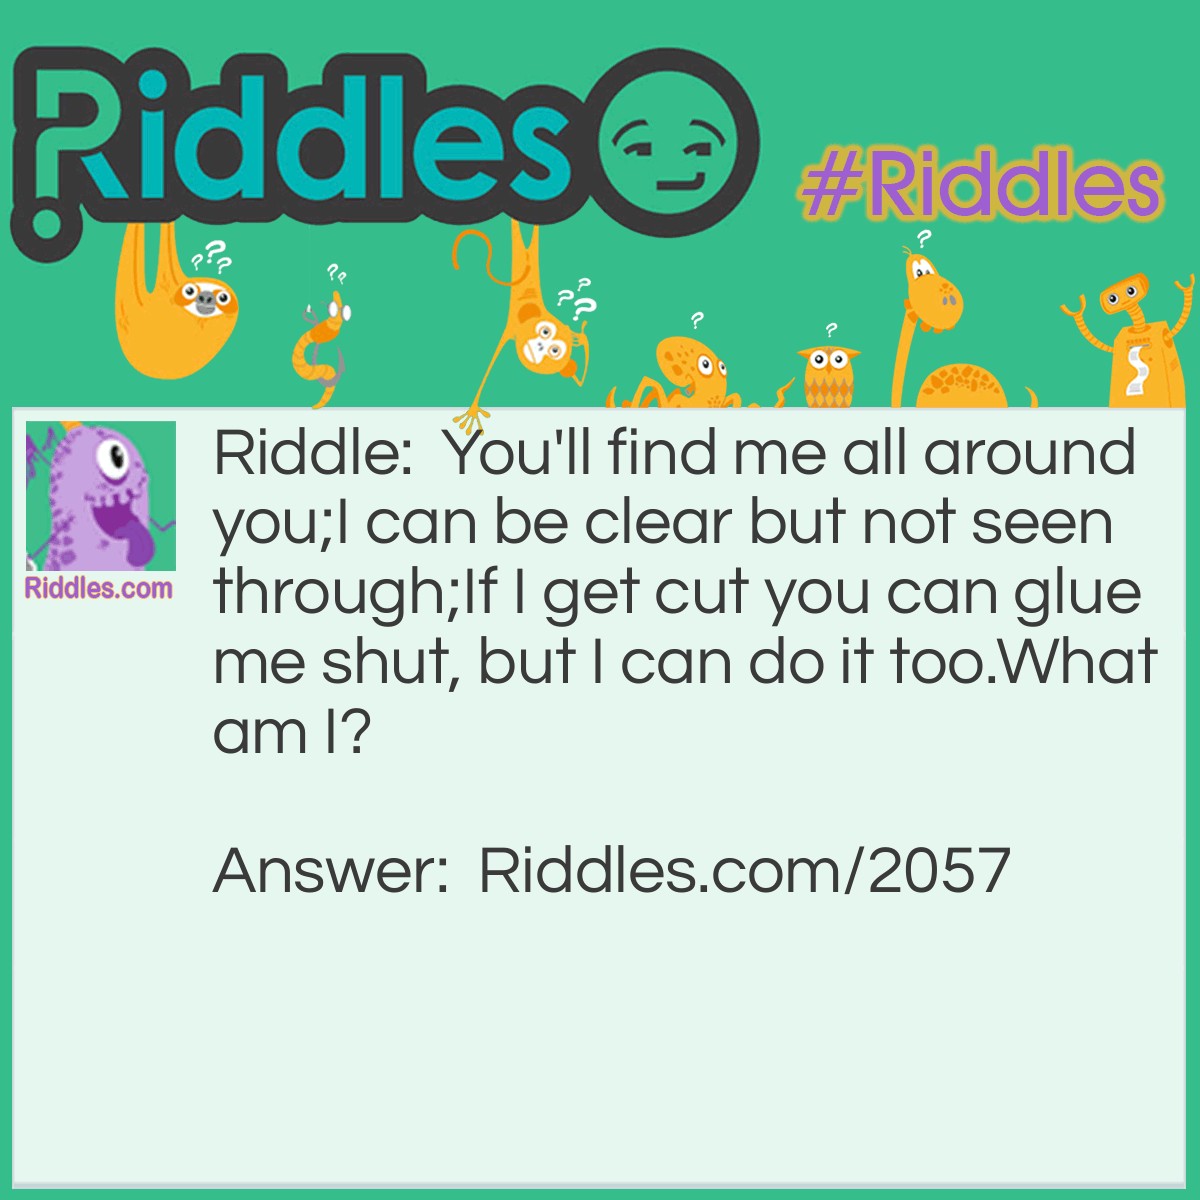 Riddle: You'll find me all around you;
I can be clear but not seen through;
If I get cut you can glue me shut, but I can do it too.
What am I? Answer: Skin